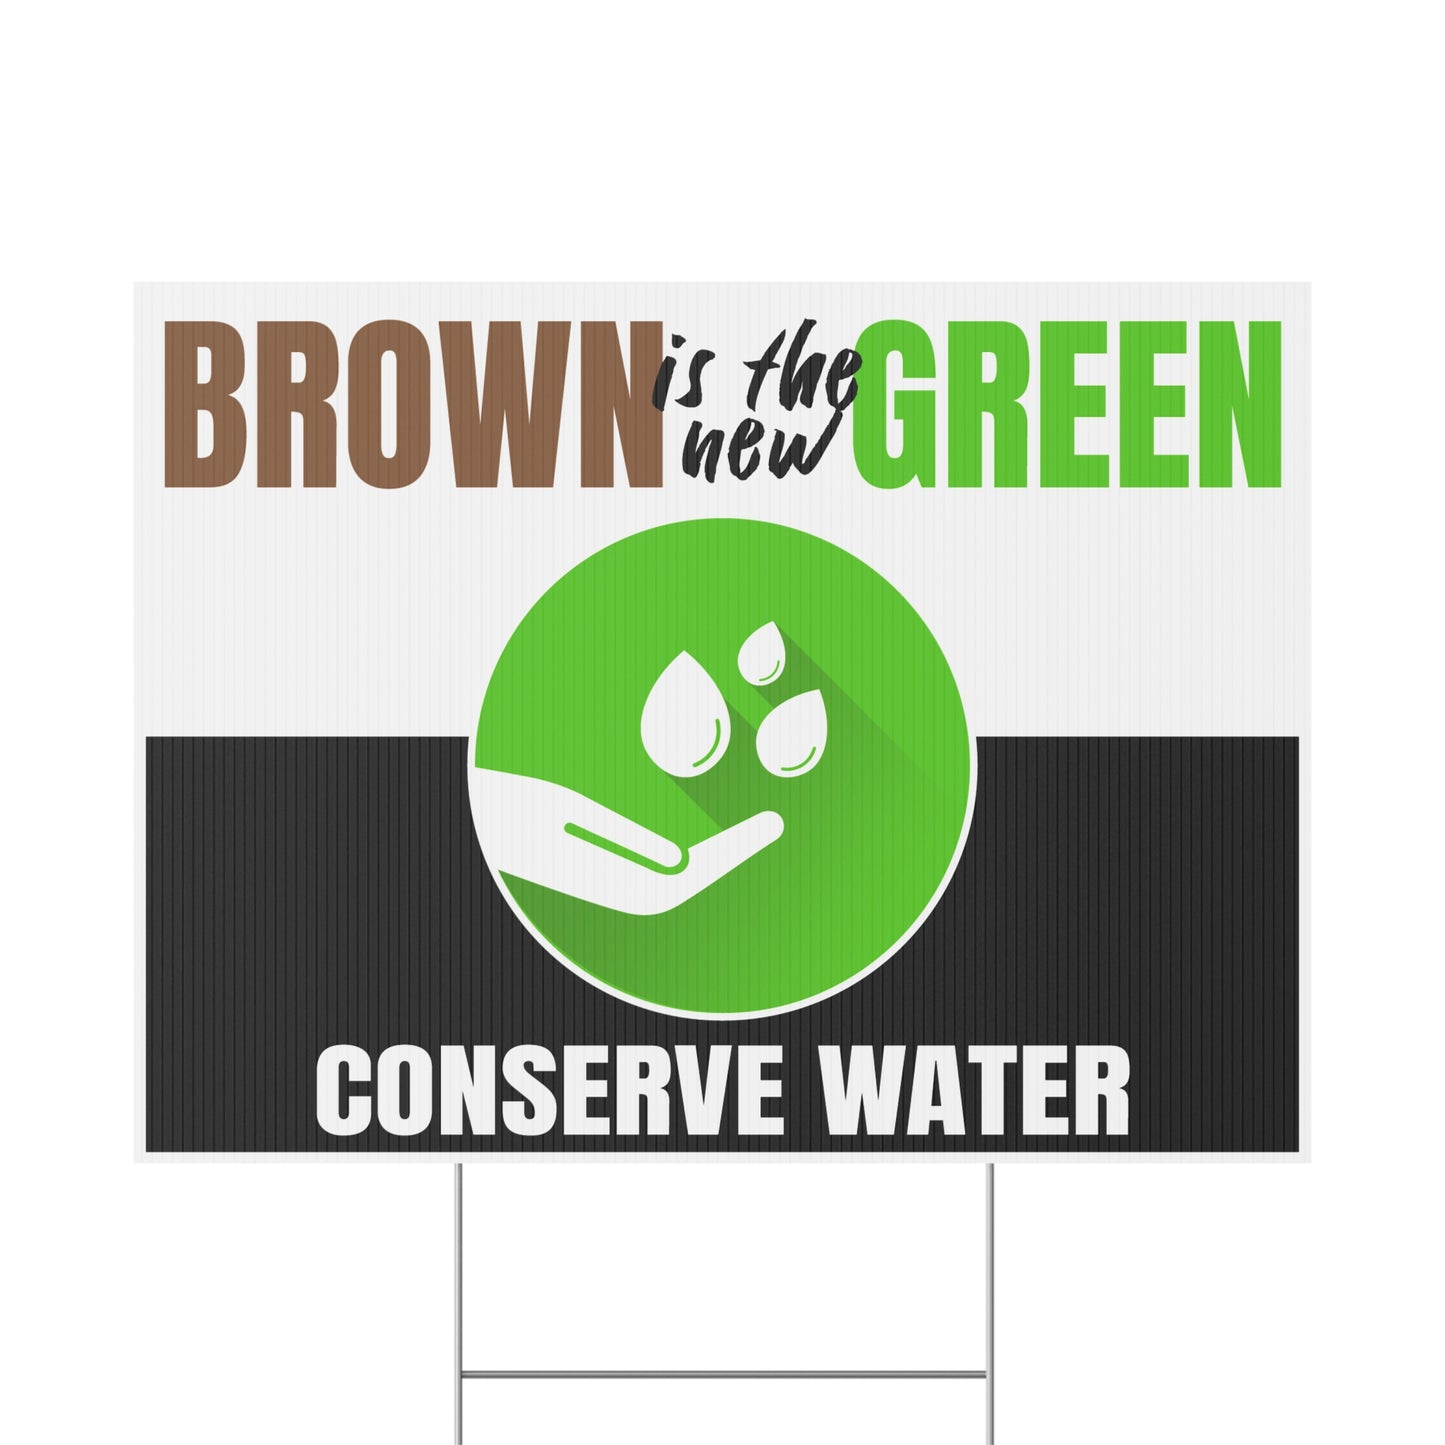 Conserve Water, Save Water, Brown is the New Green, Yard Sign, 18x12, 24x18, 36x24, v4